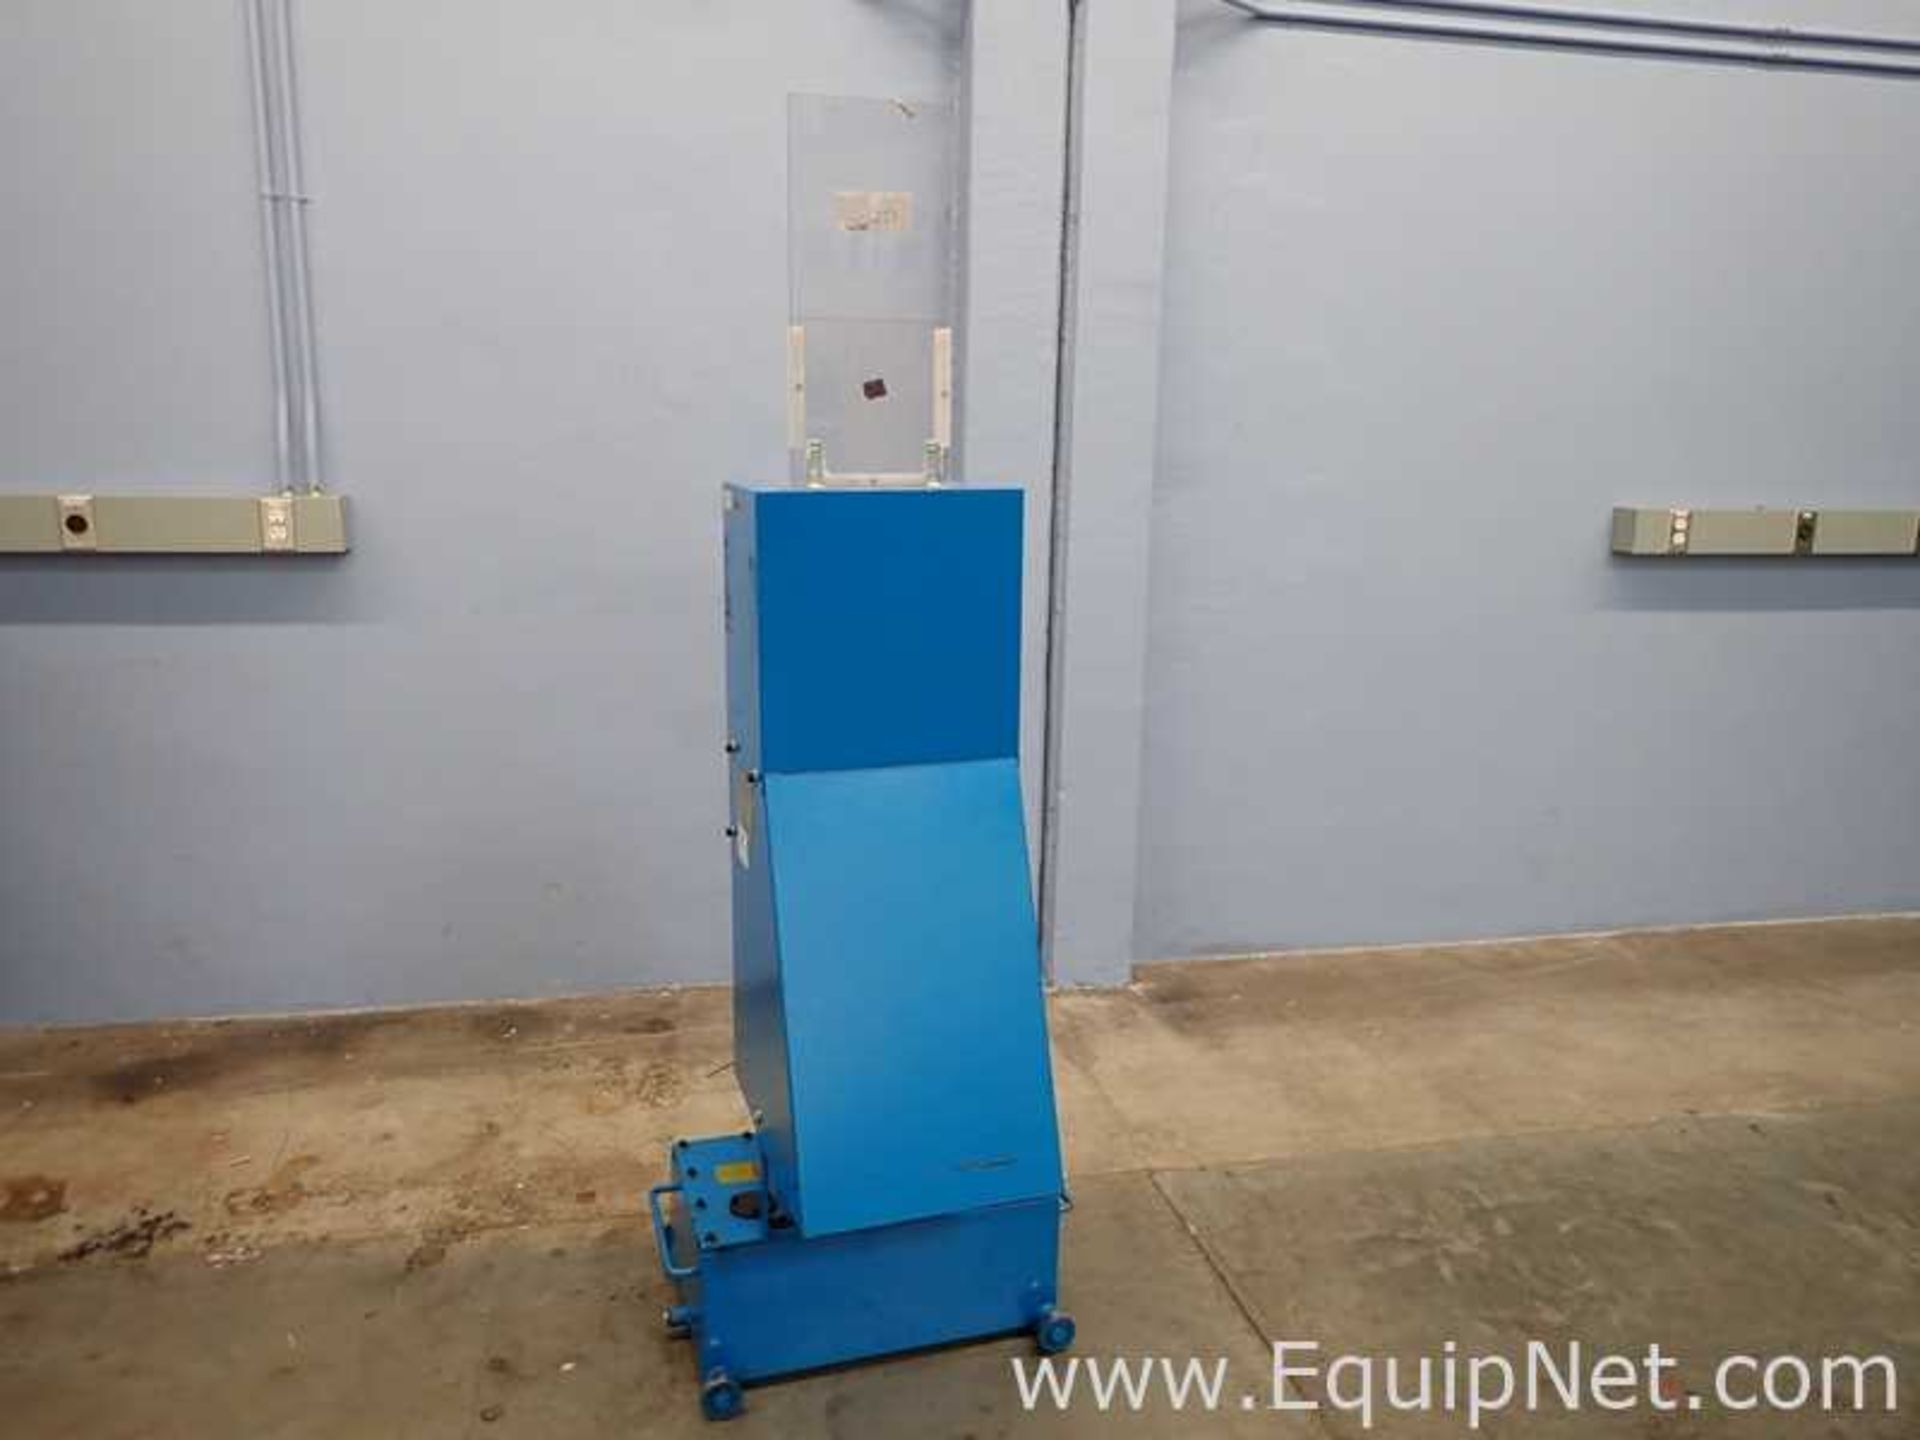 EQUIPNET LISTING #762342; REMOVAL COST: $40; MODEL: YM-7057; DESCRIPTION: New Yu Ming Machinery - Image 11 of 12